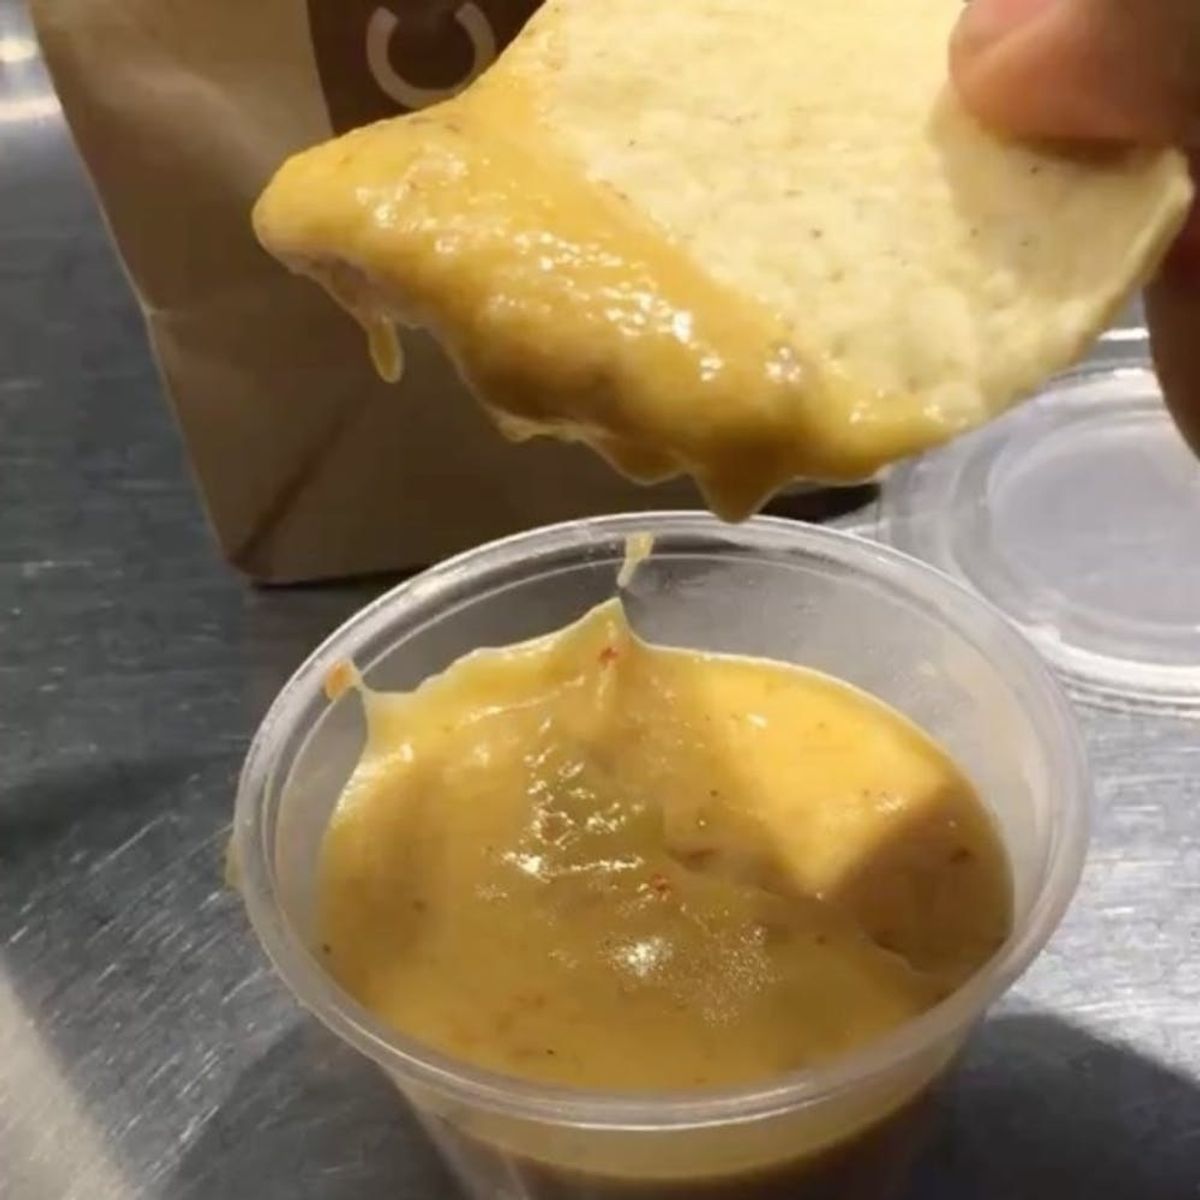 Chipotle Is Testing Cheesy Queso Dip!